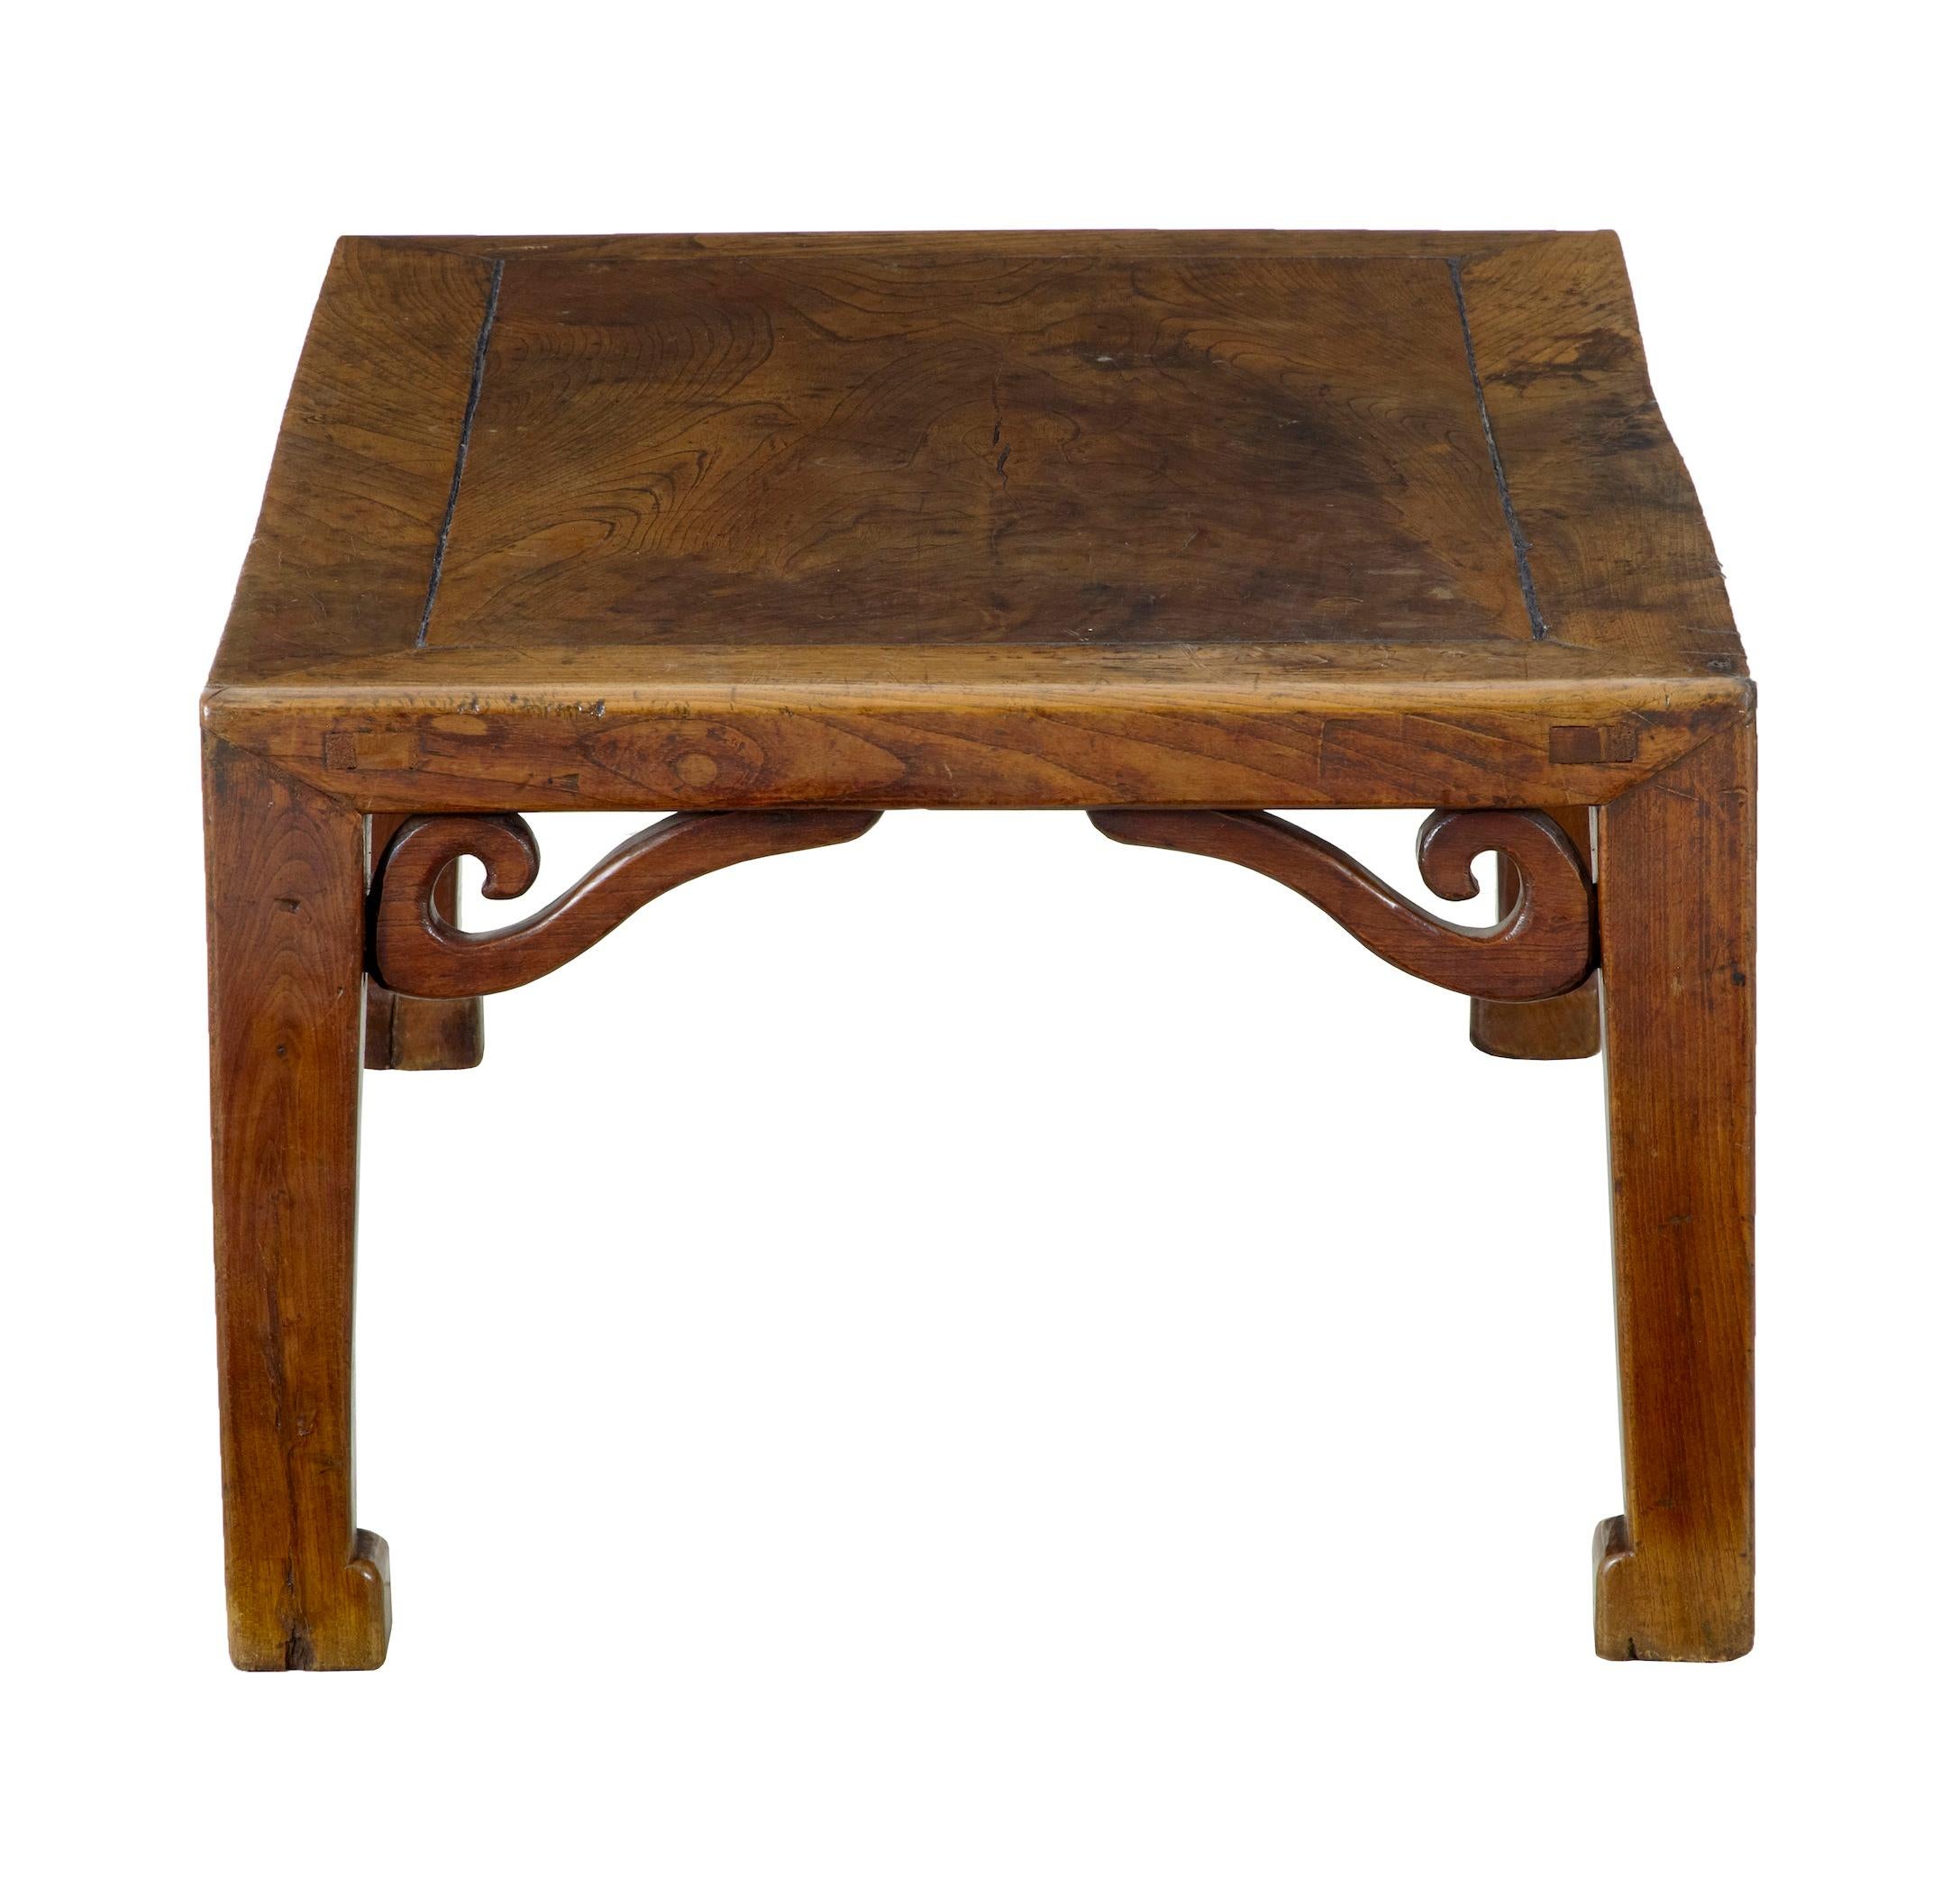 Very good quality low Chinese table, circa 1870.
Great color and patina.
Applied carved scrolls which run underneath the top.
Expected slight warping and surface marks.
   